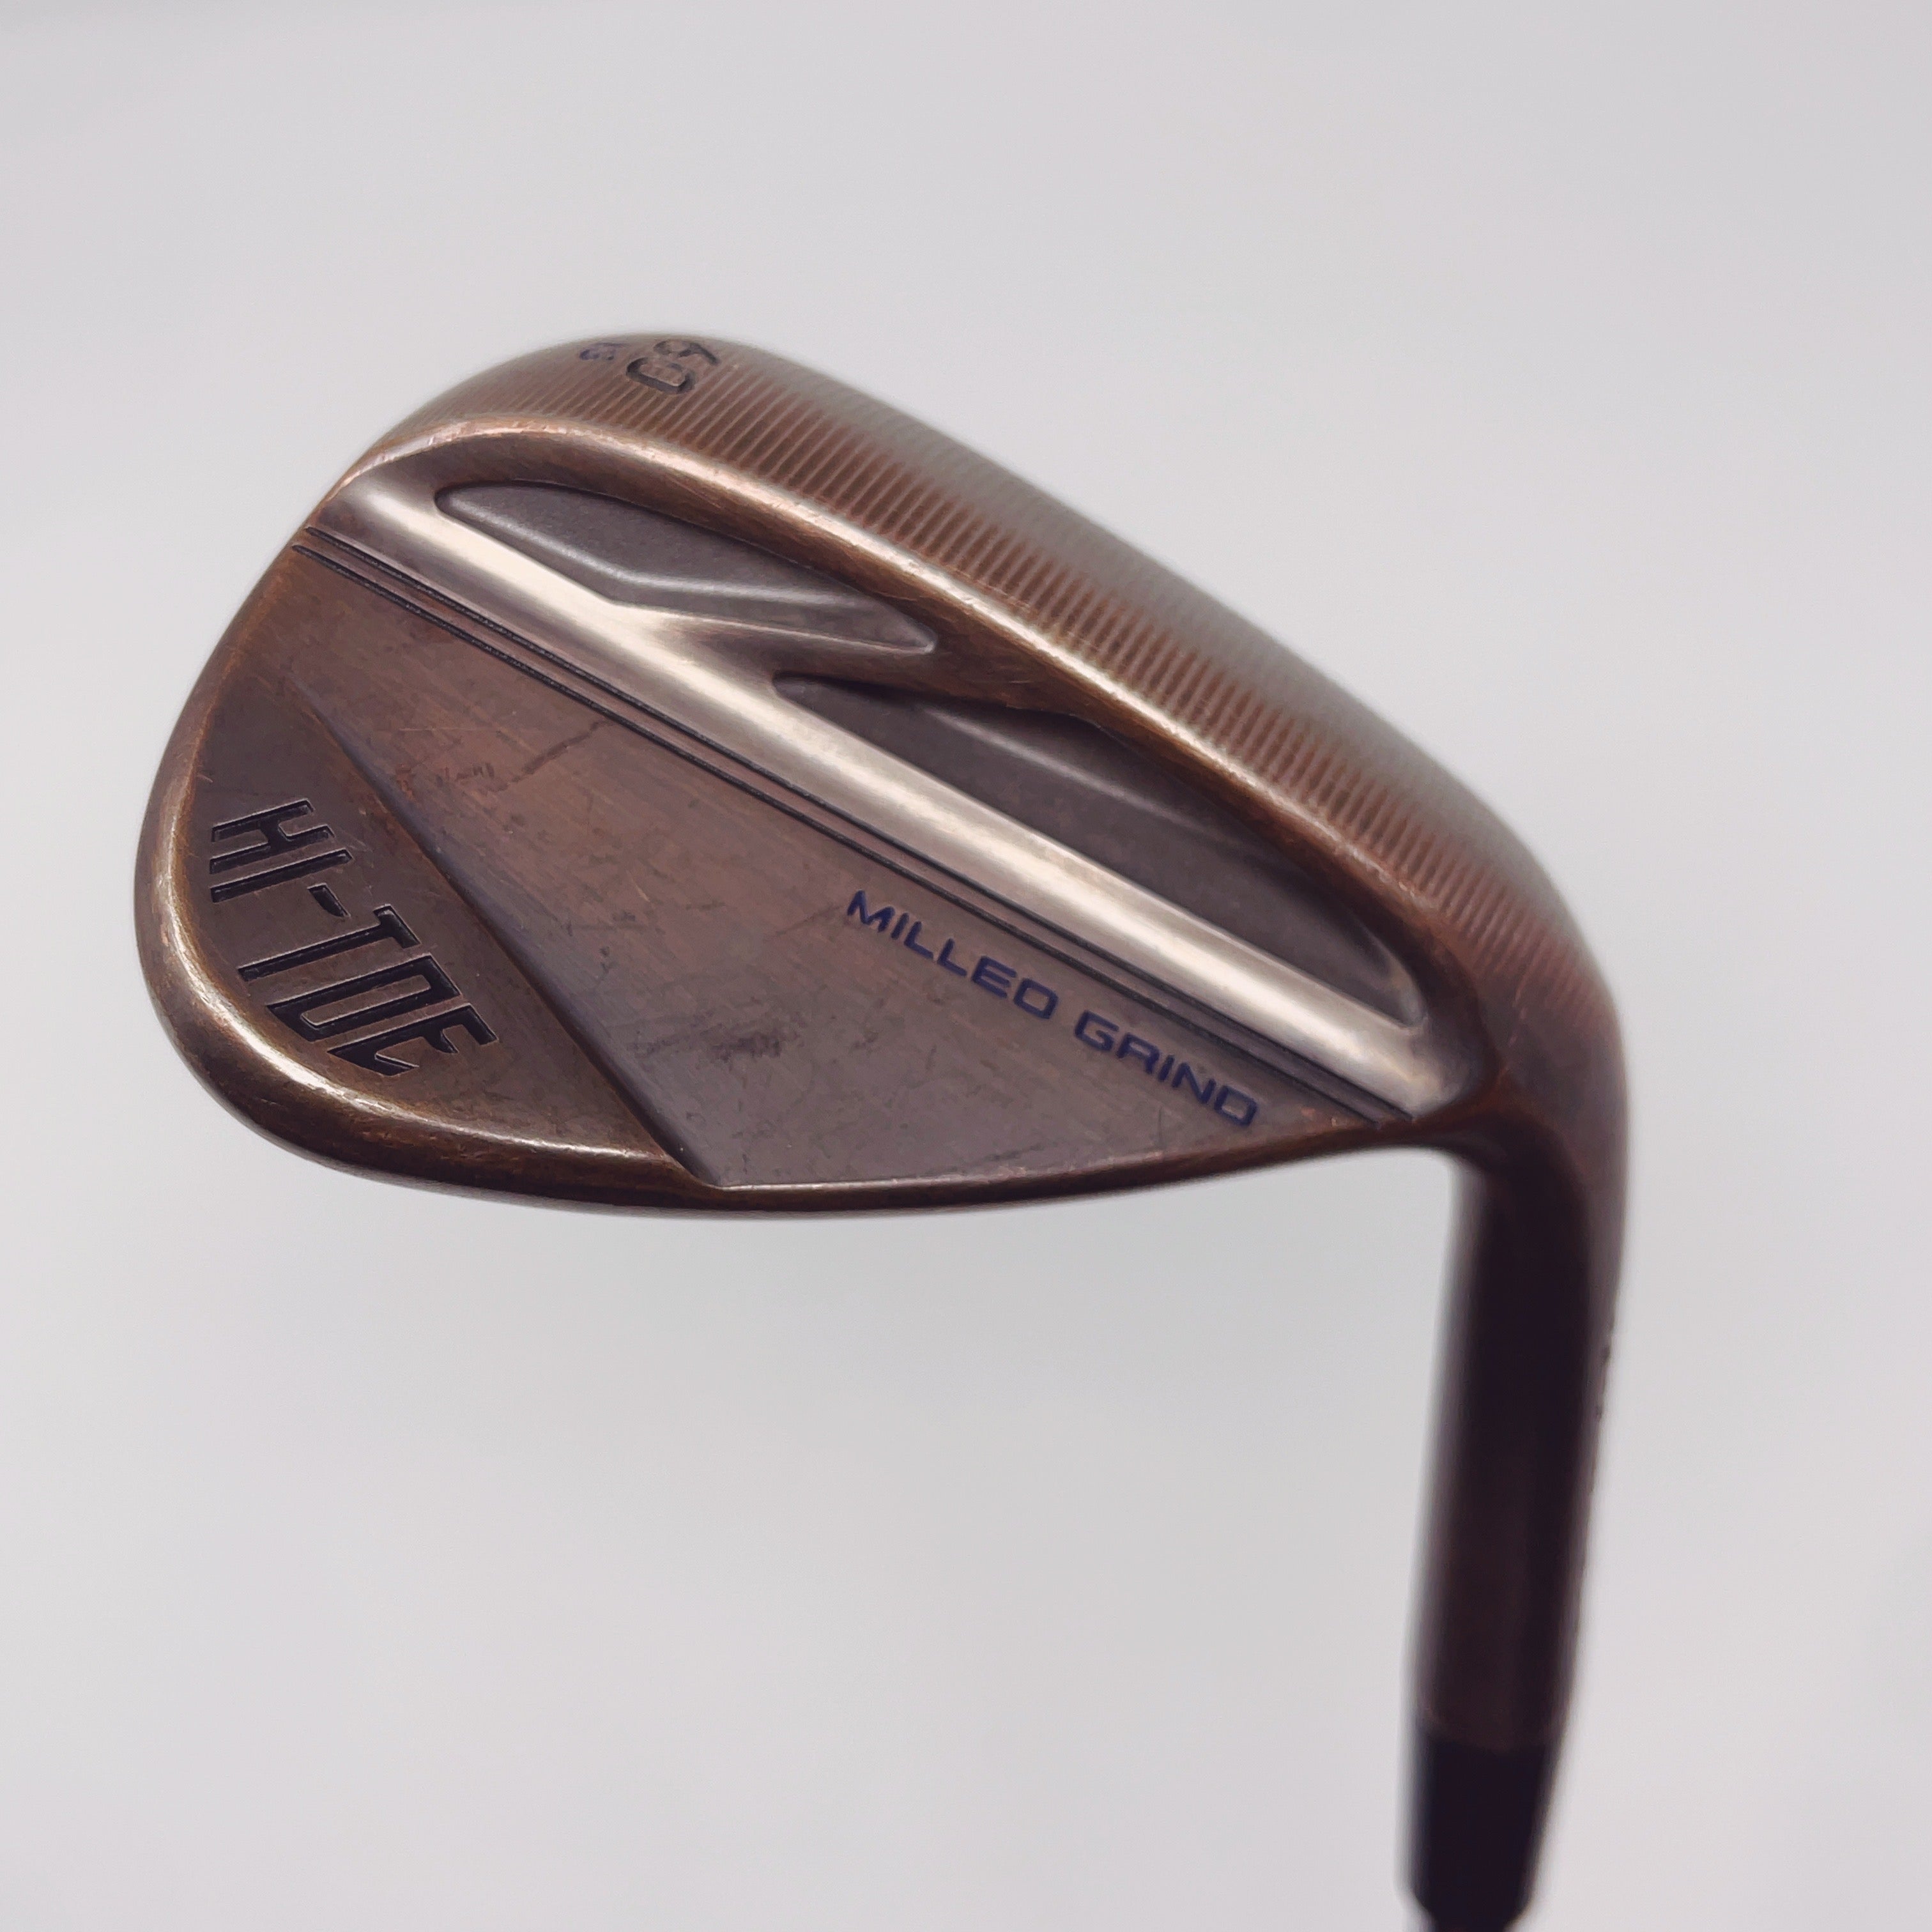 TAYLORMADE HI-TOE MILLED GRIND WEDGE / 60 DEGREE 13 BOUNCE / NS PRO 850 GH REG